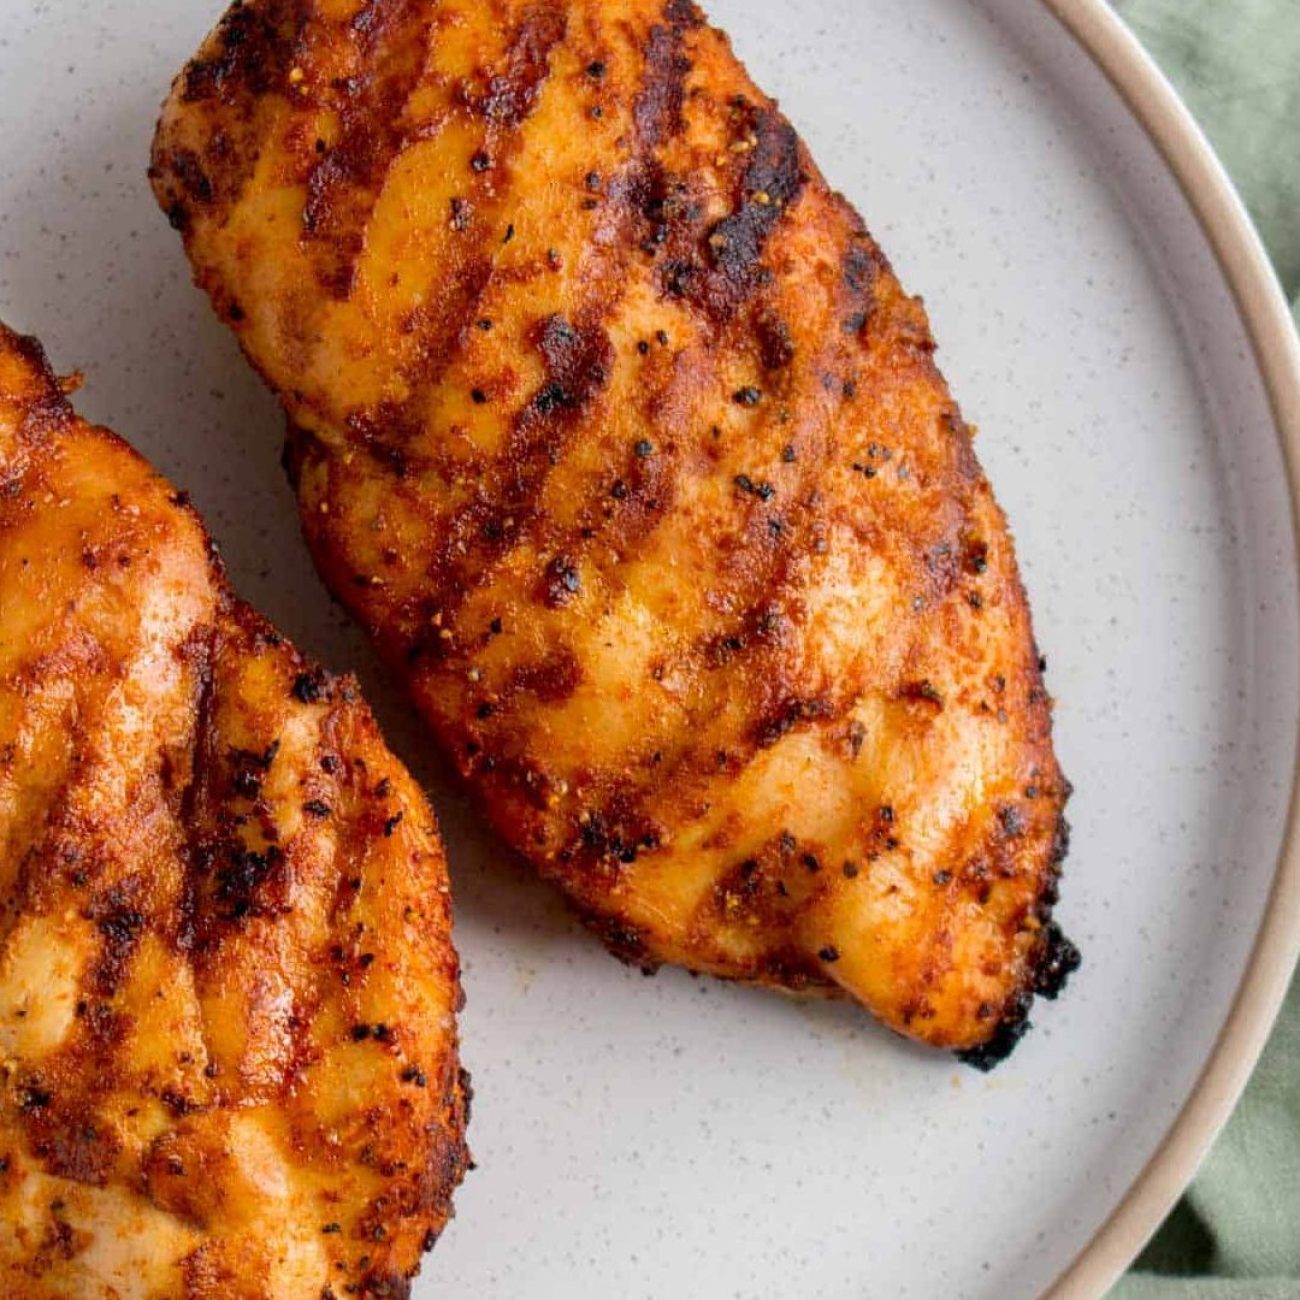 Barbecued Chicken Breasts